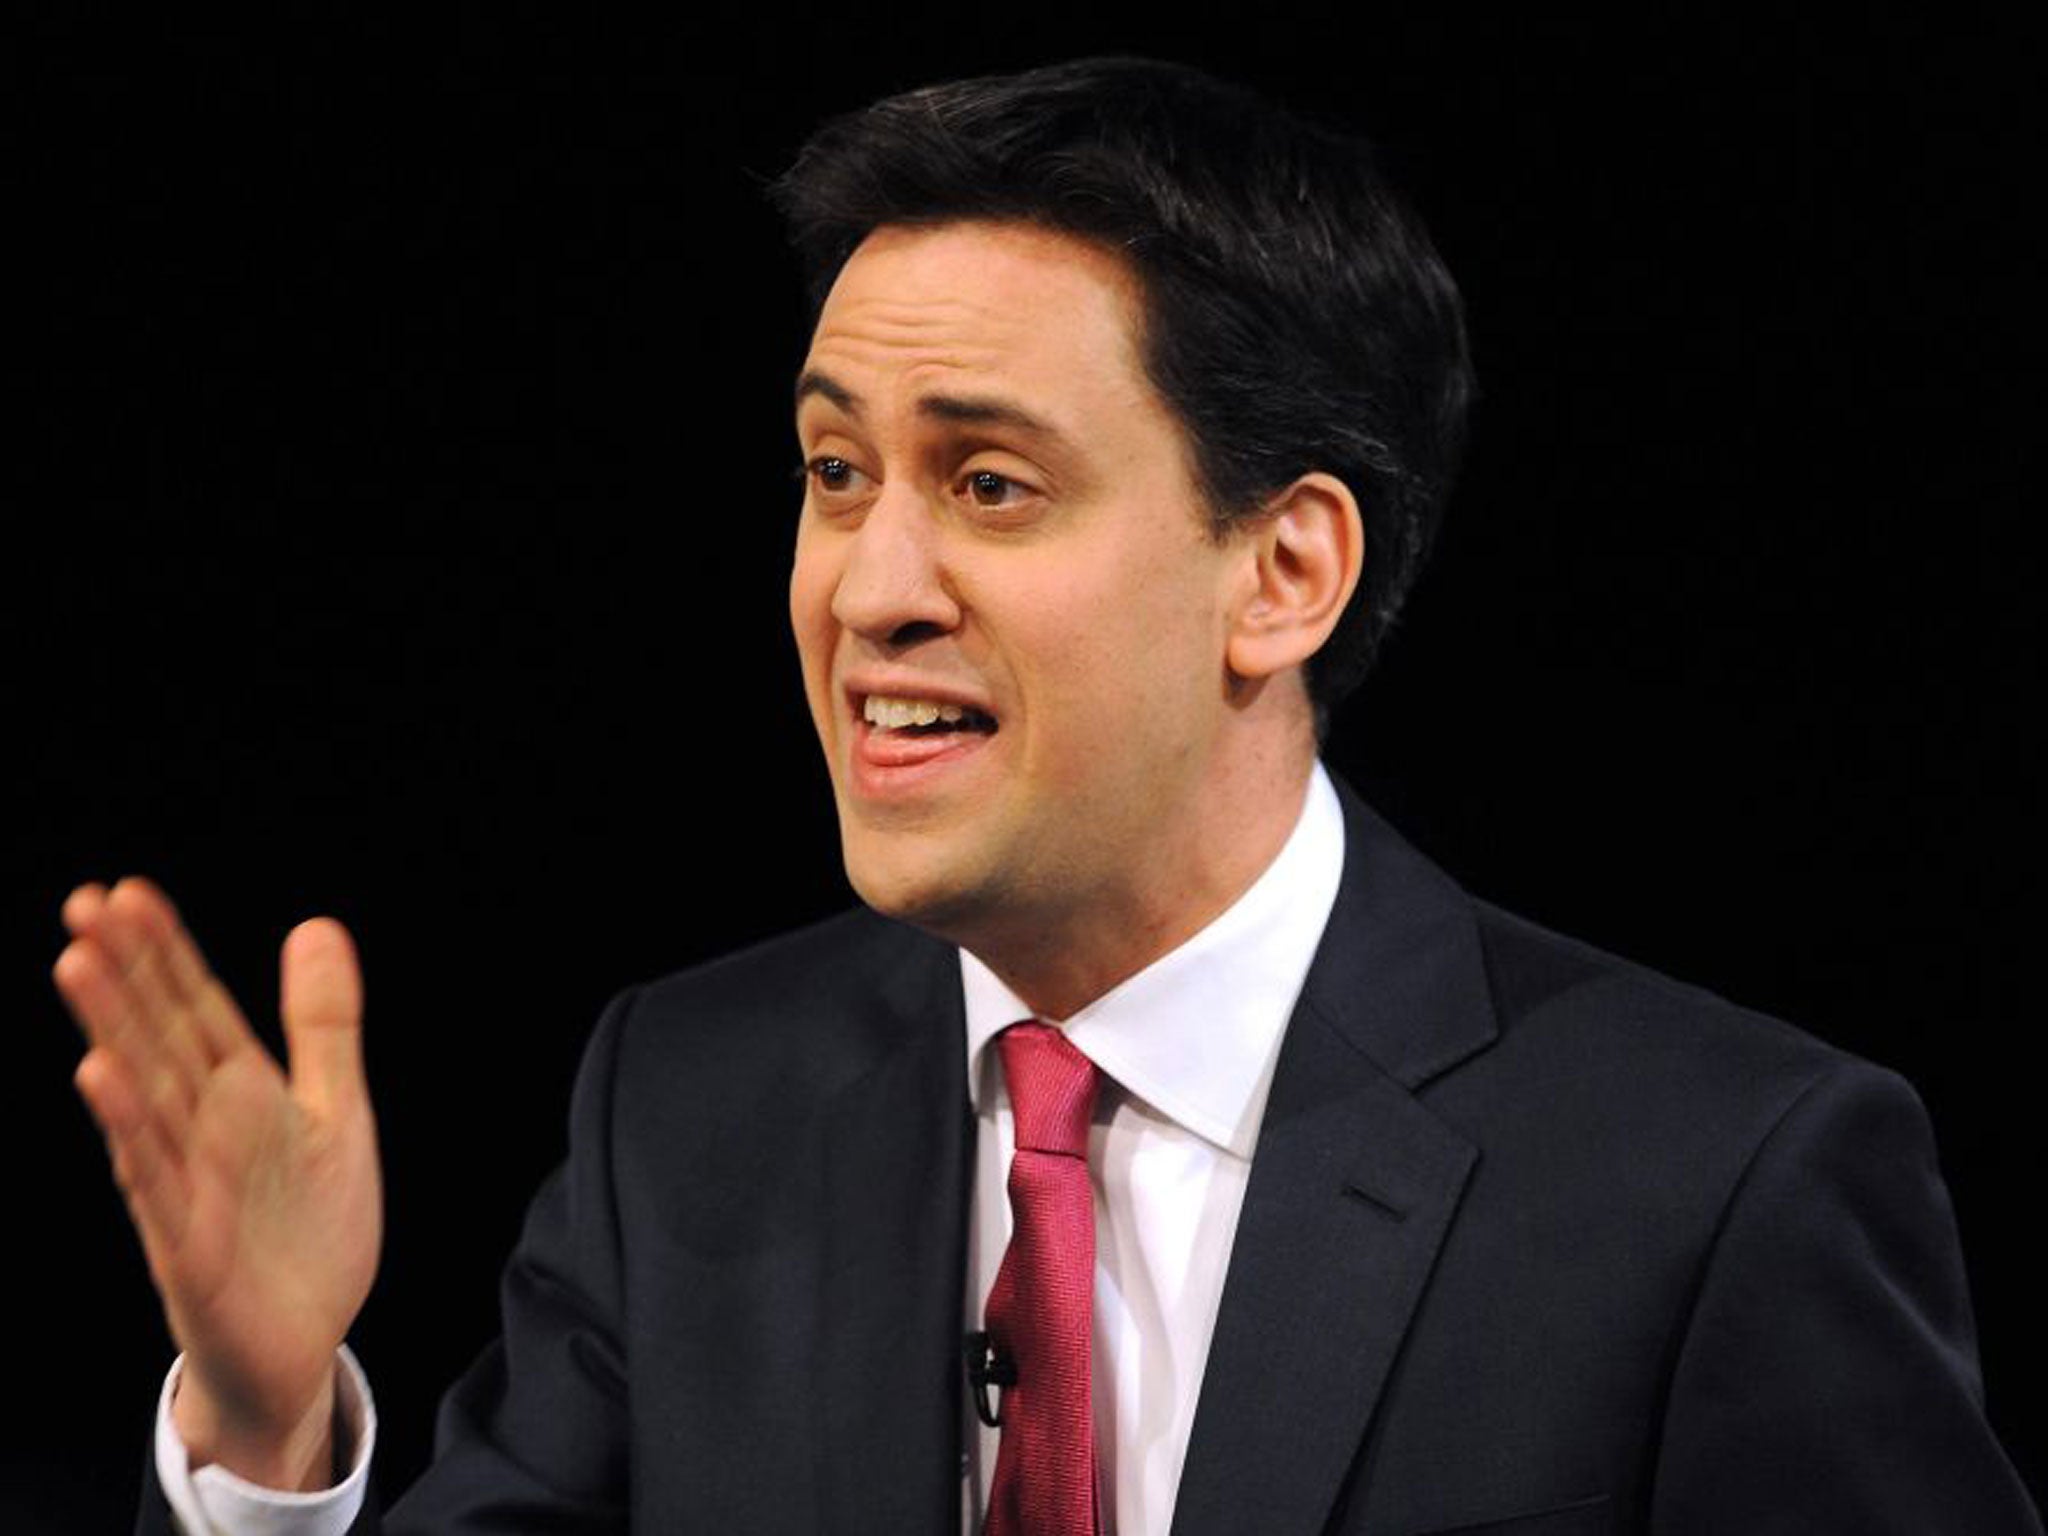 Ed Miliband has faced criticism over his performance from backbenchers